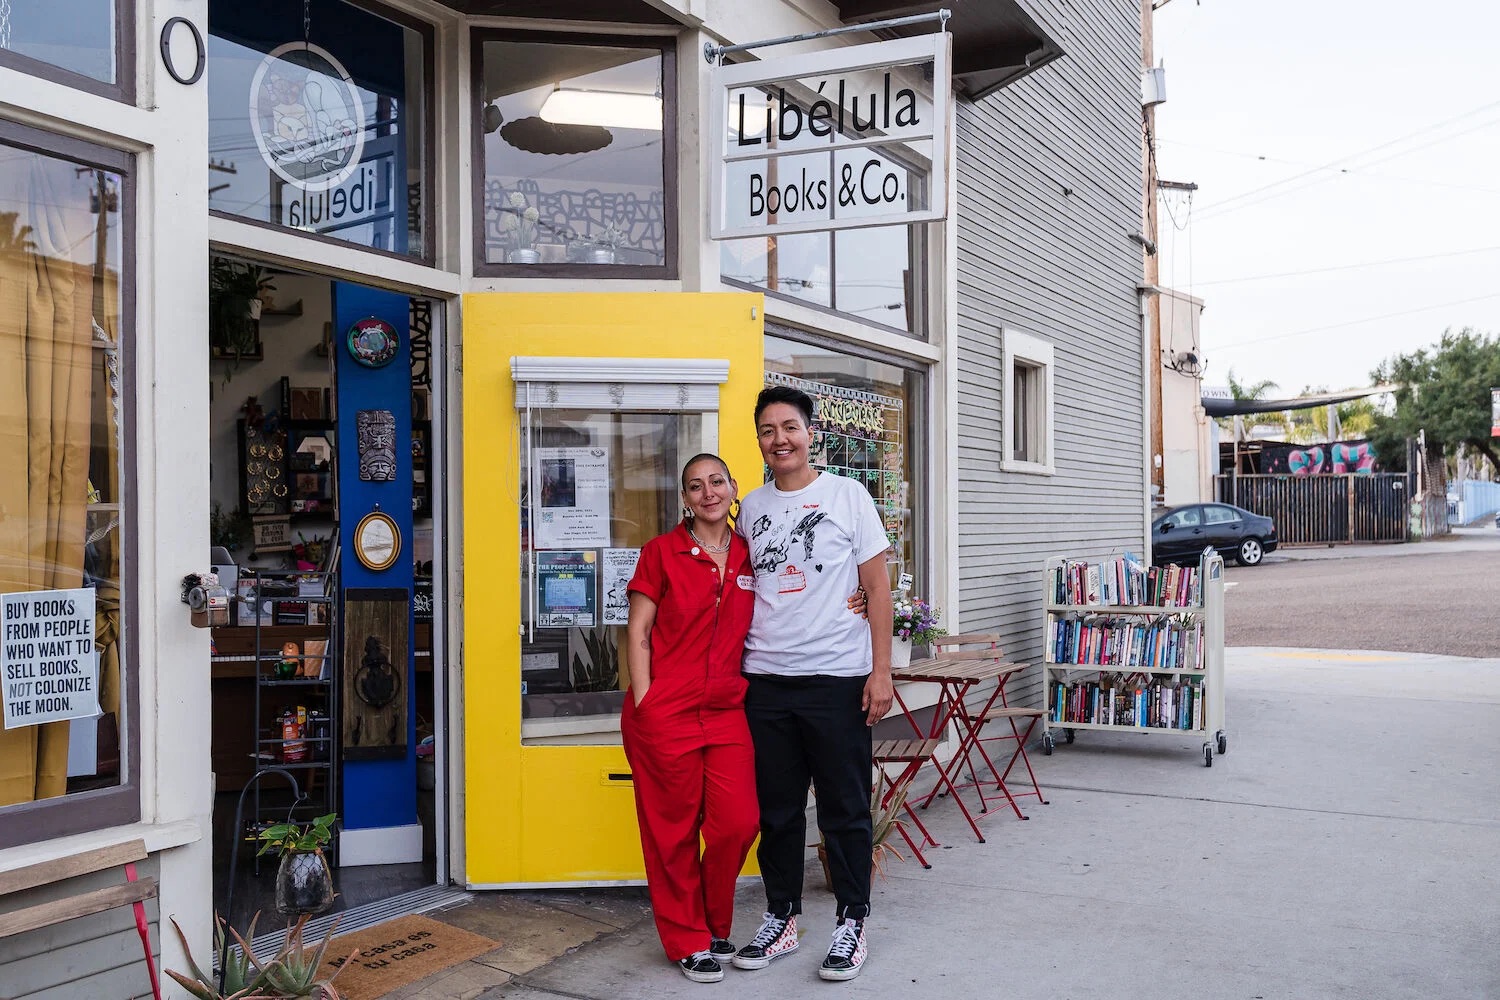 Exterior of San Diego bookshop and boutique Libélula Books & Co. in Barrio Logan